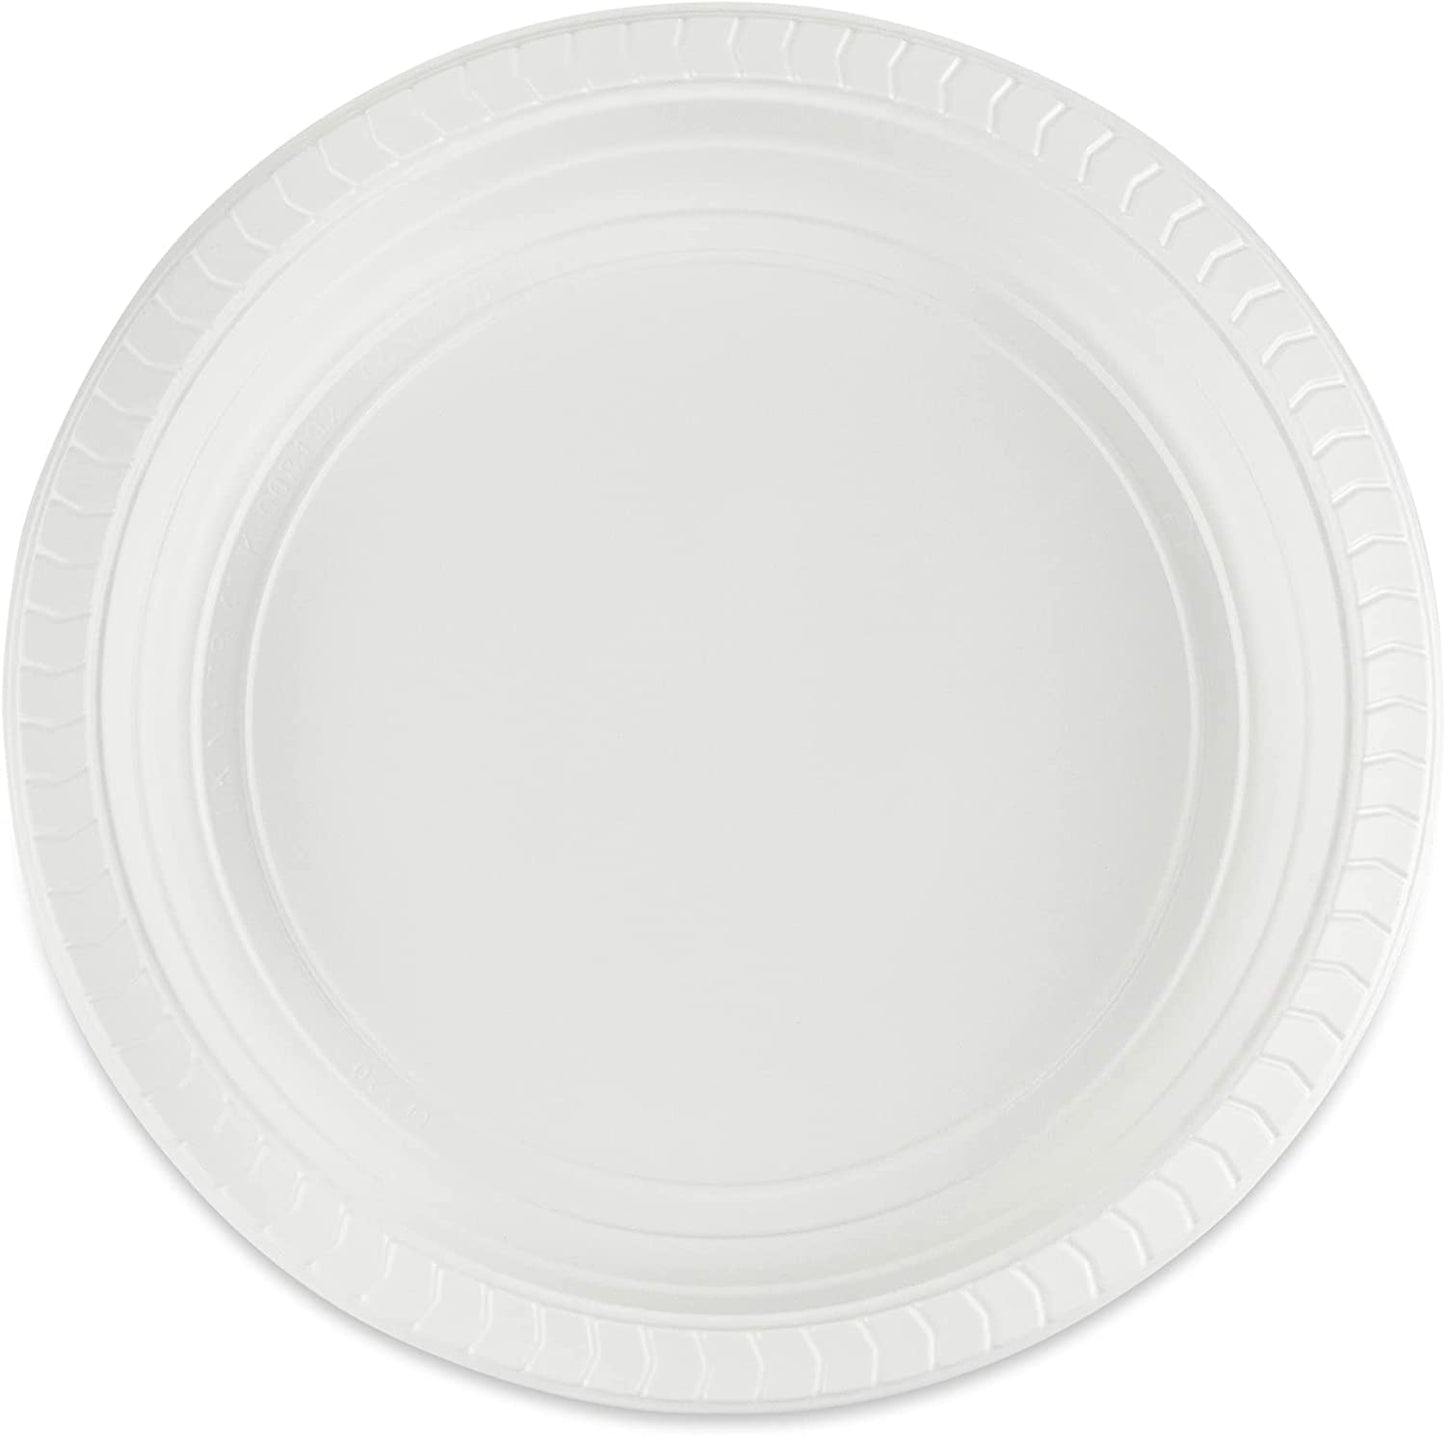 9" Disposable Lightweight White Plastic plates Good to use in Microwave Plastic Plates Blue Sky   